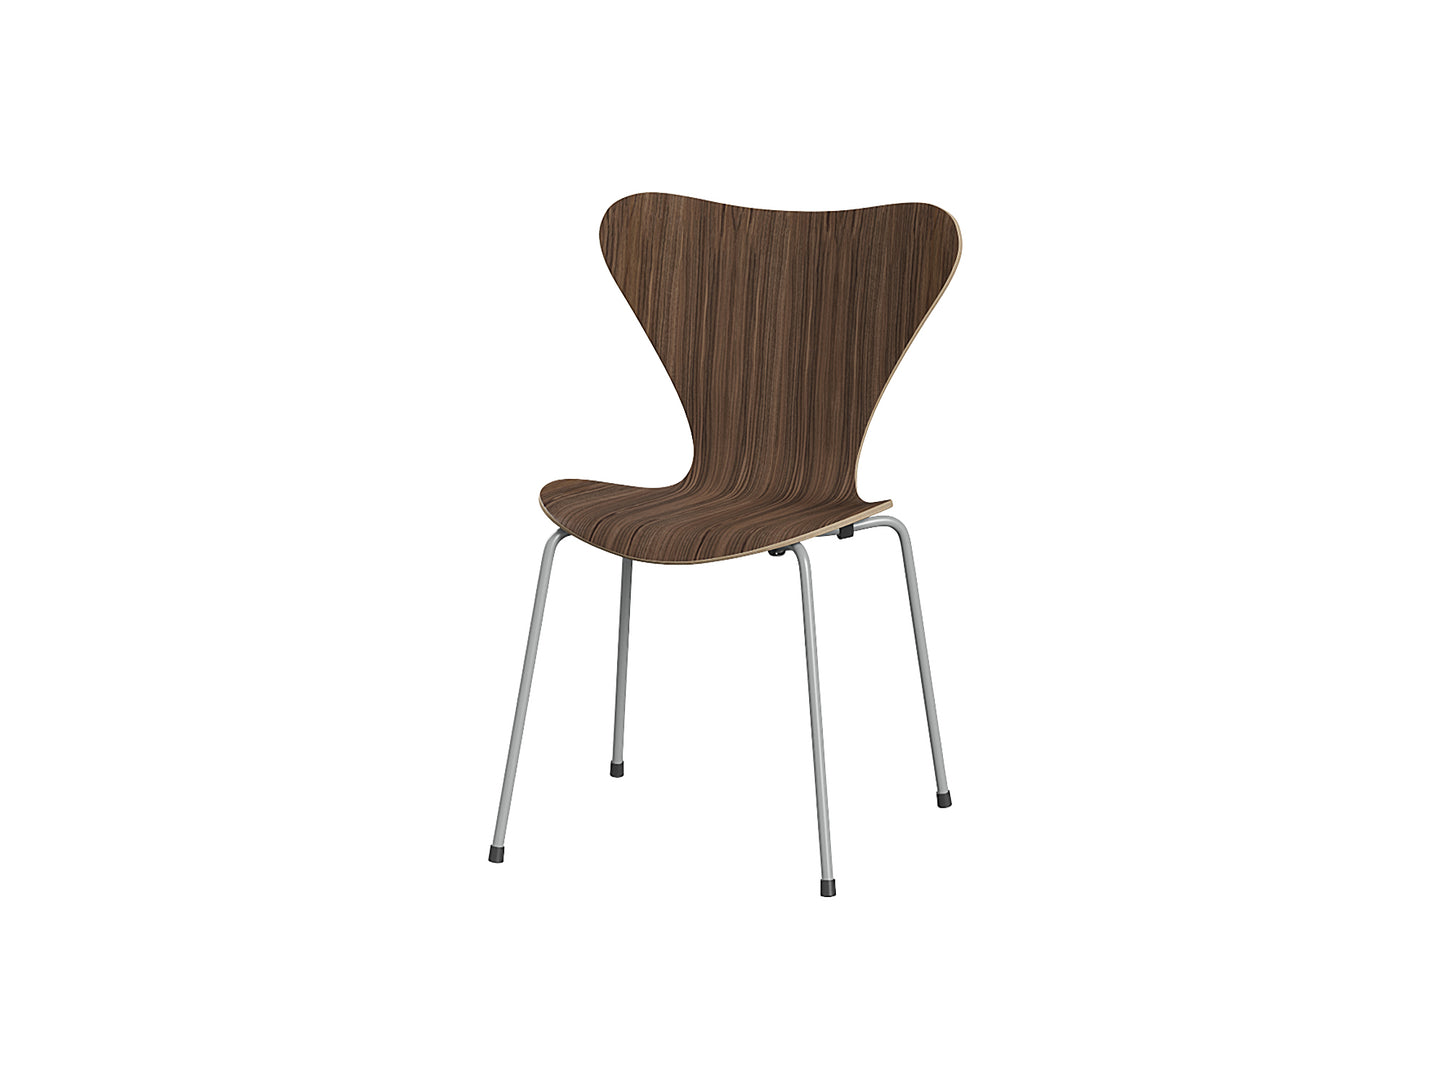 Series 7 Dining Chair (Clear Lacquered Wood) by Fritz Hanse - Walnut / Nine Grey Steel